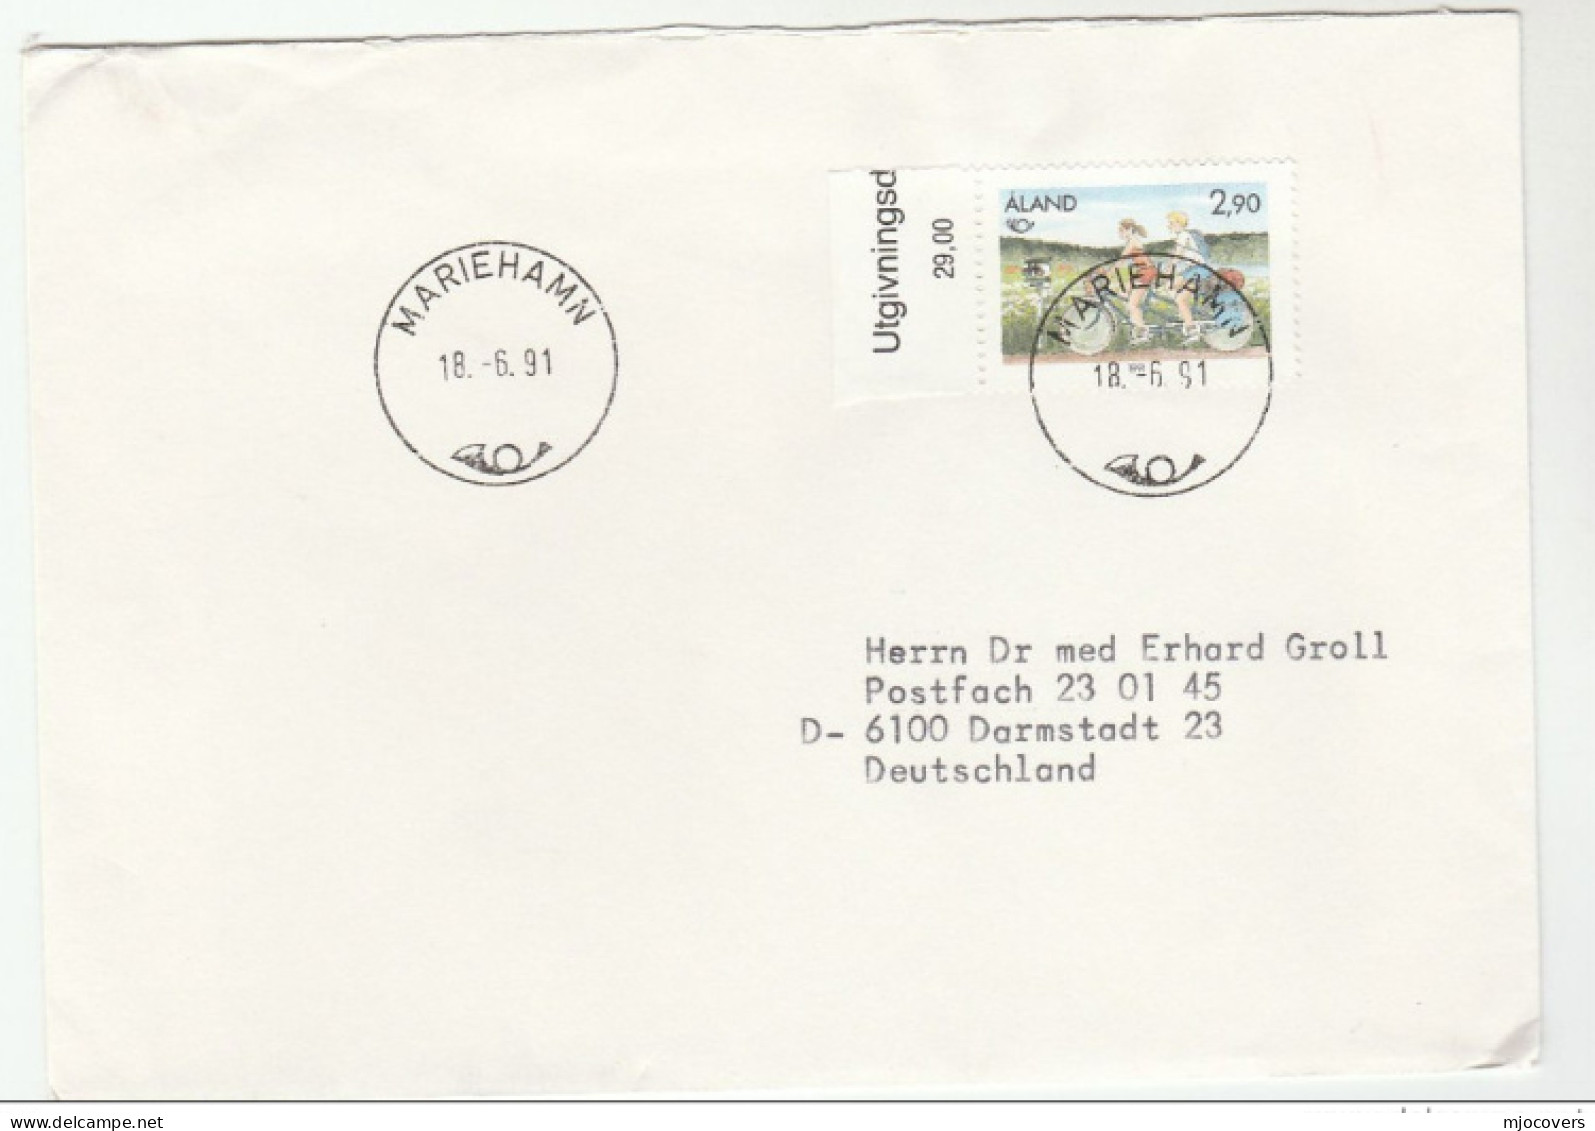 CYCLING Mariehamn ALAND Cover To Germany Bike Bicycle 1991 Stamps - Ciclismo